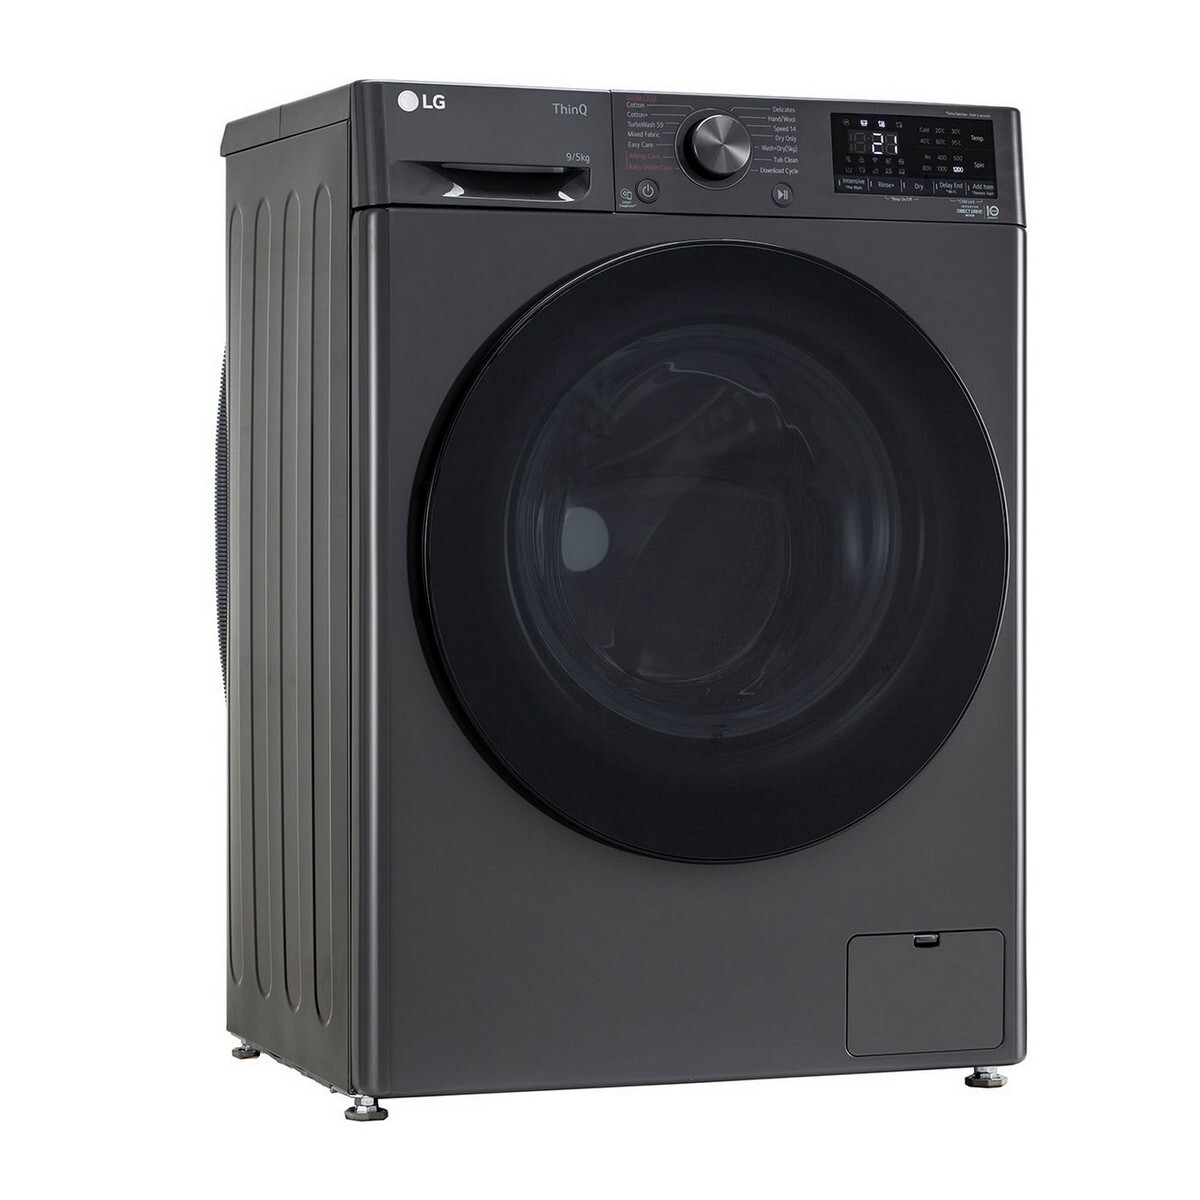 LG Fully Automatic Front Load Washer Dryer FHD0905SWM 9 Kg Middle Black